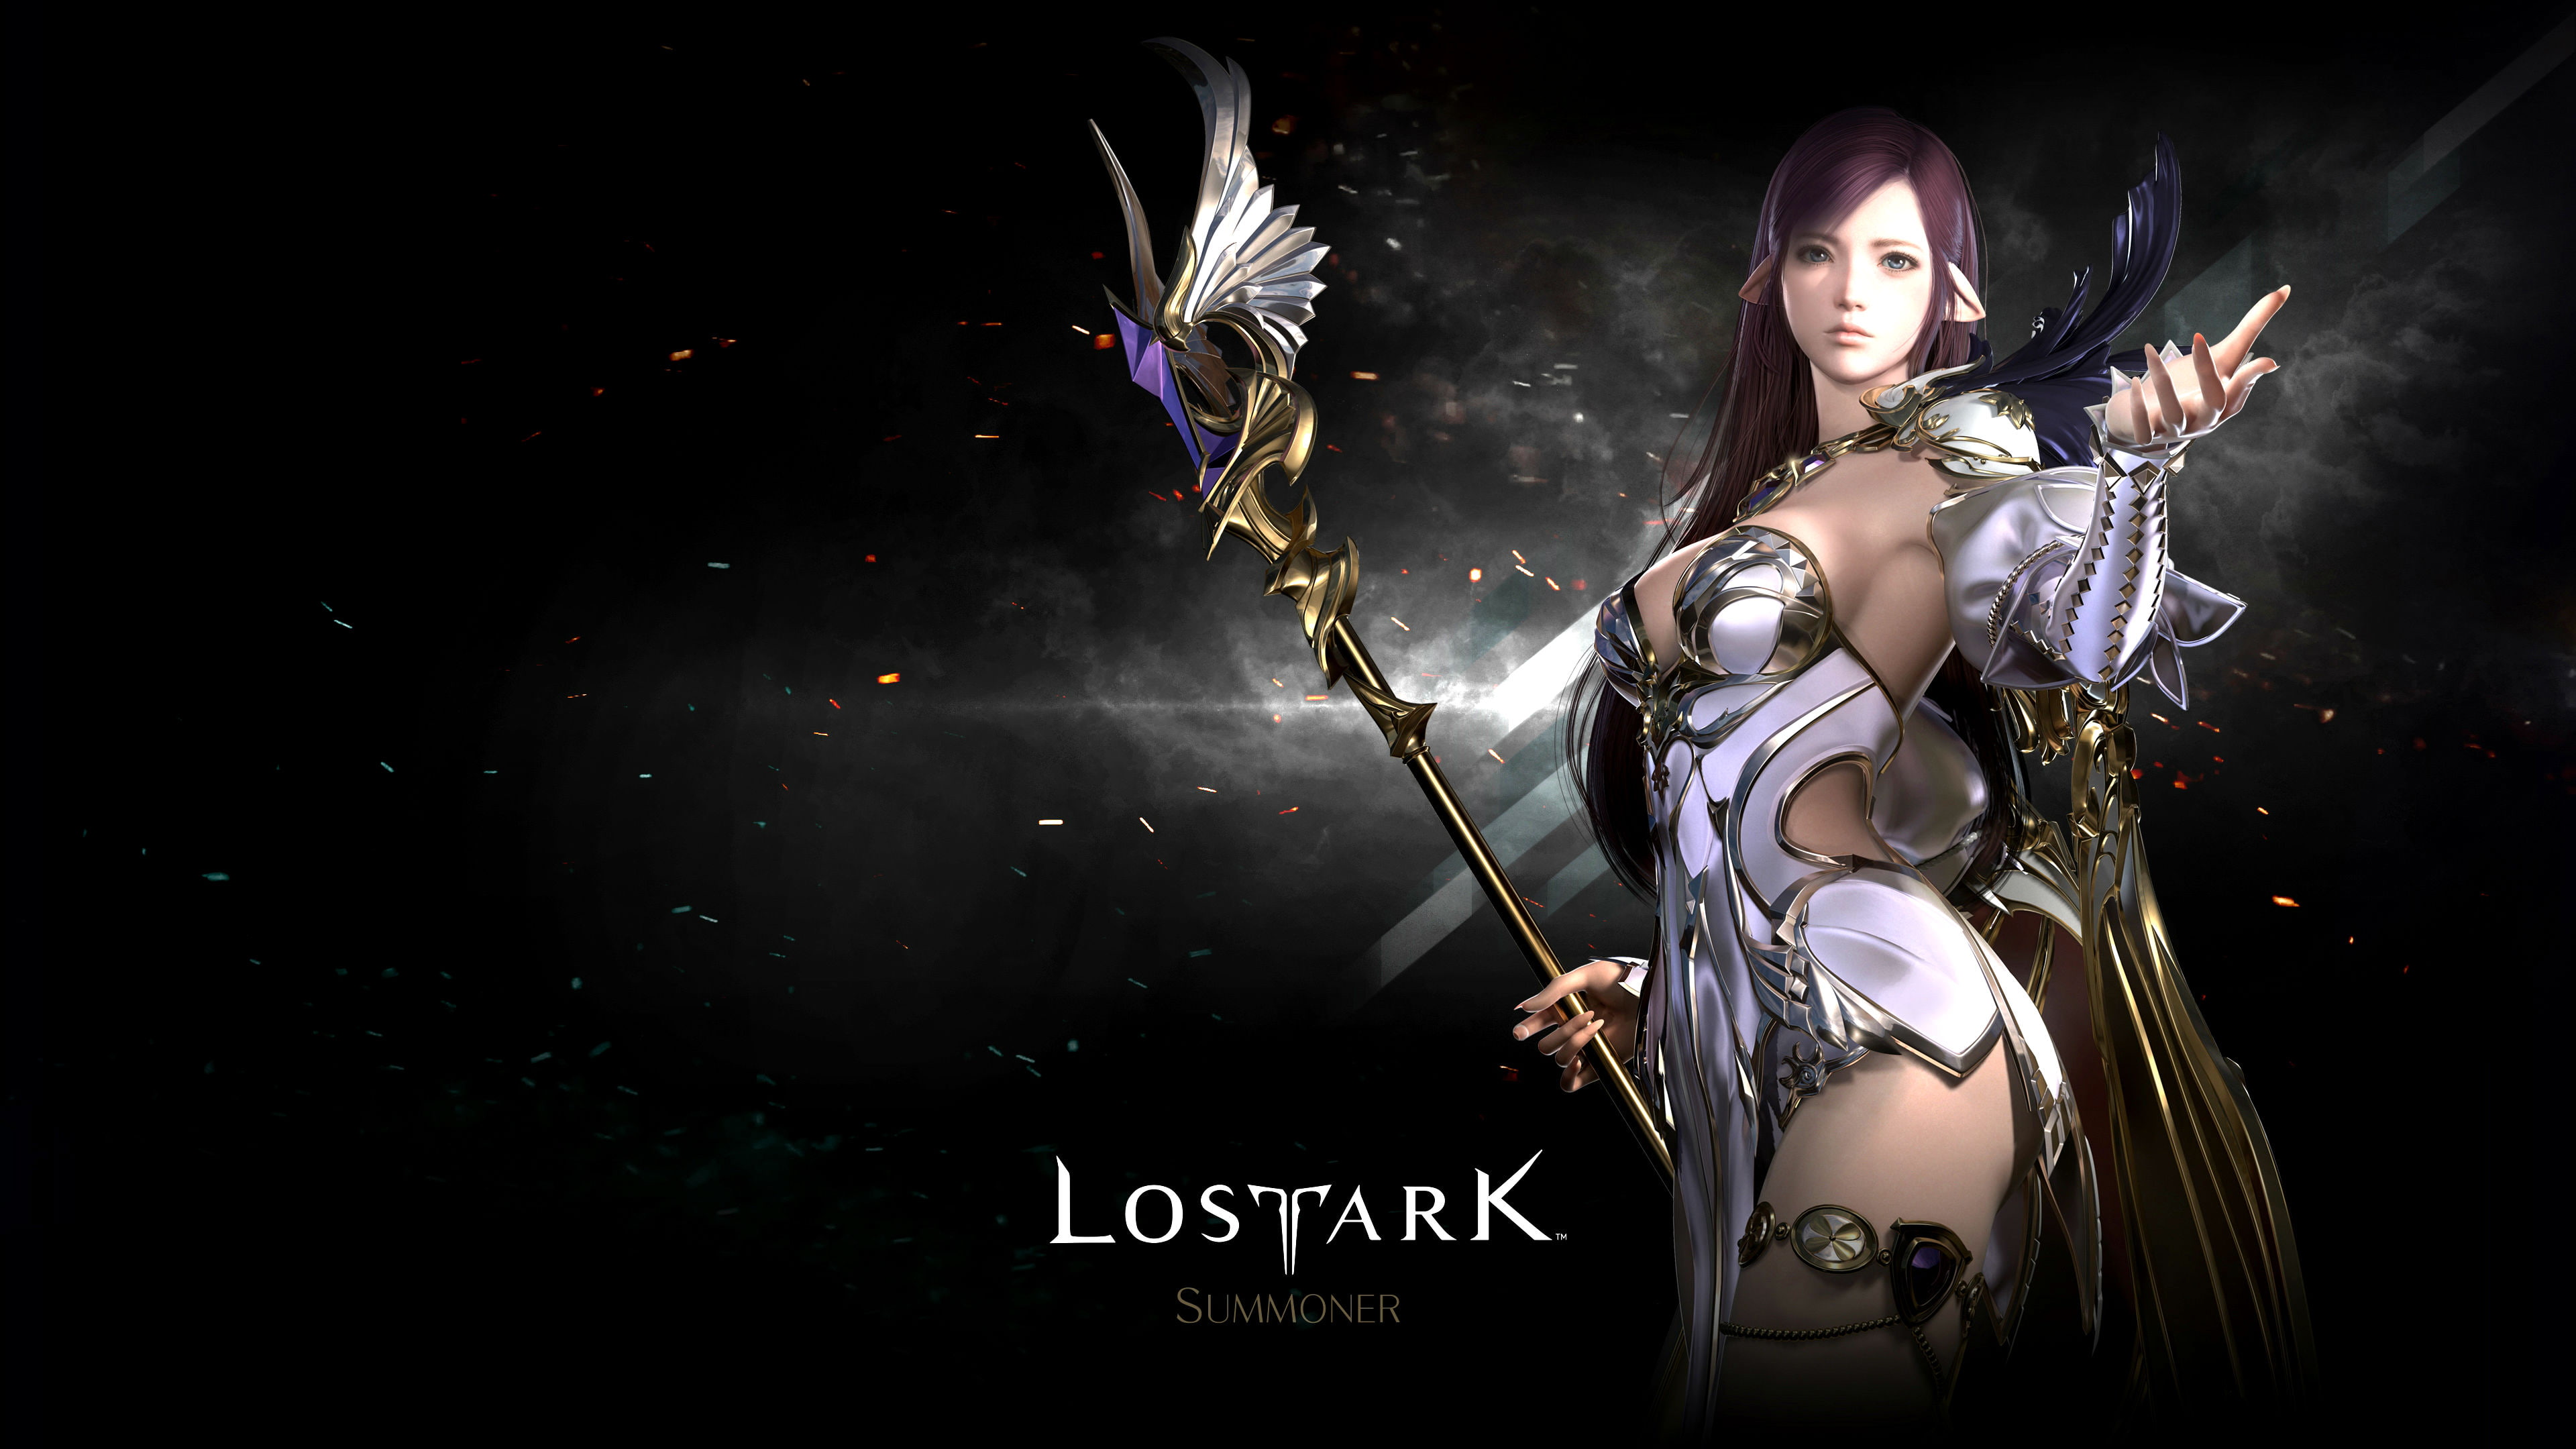 1lao, action, ark, fantasy, fighting, lost, mmo, online, rpg